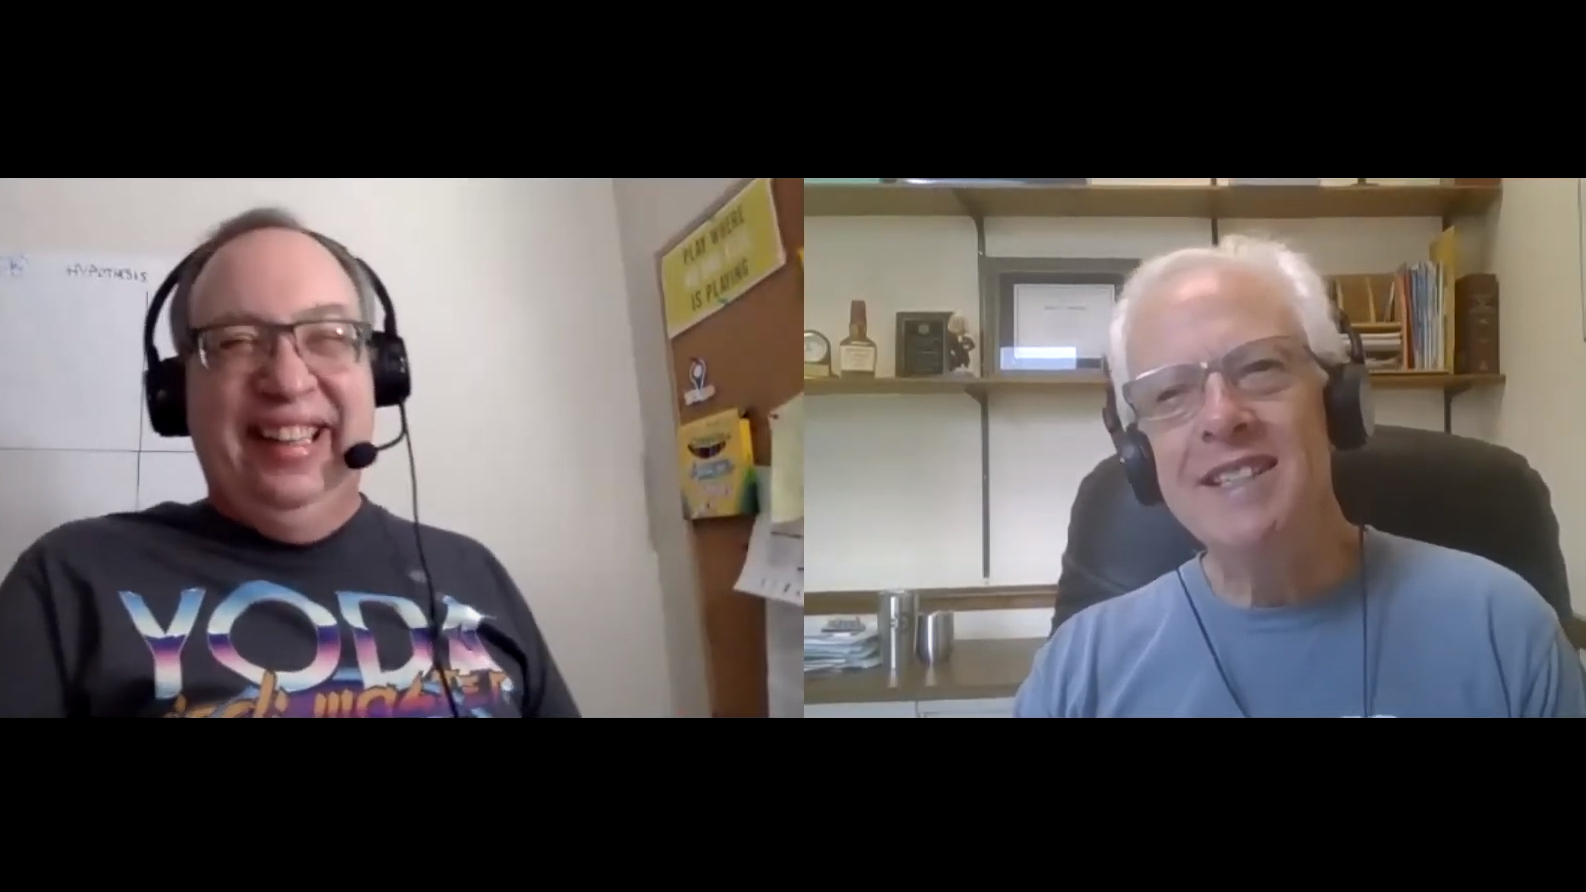 ICYMI: My Litera TV Interview with Legal Technologist and Innovator Dennis Kennedy